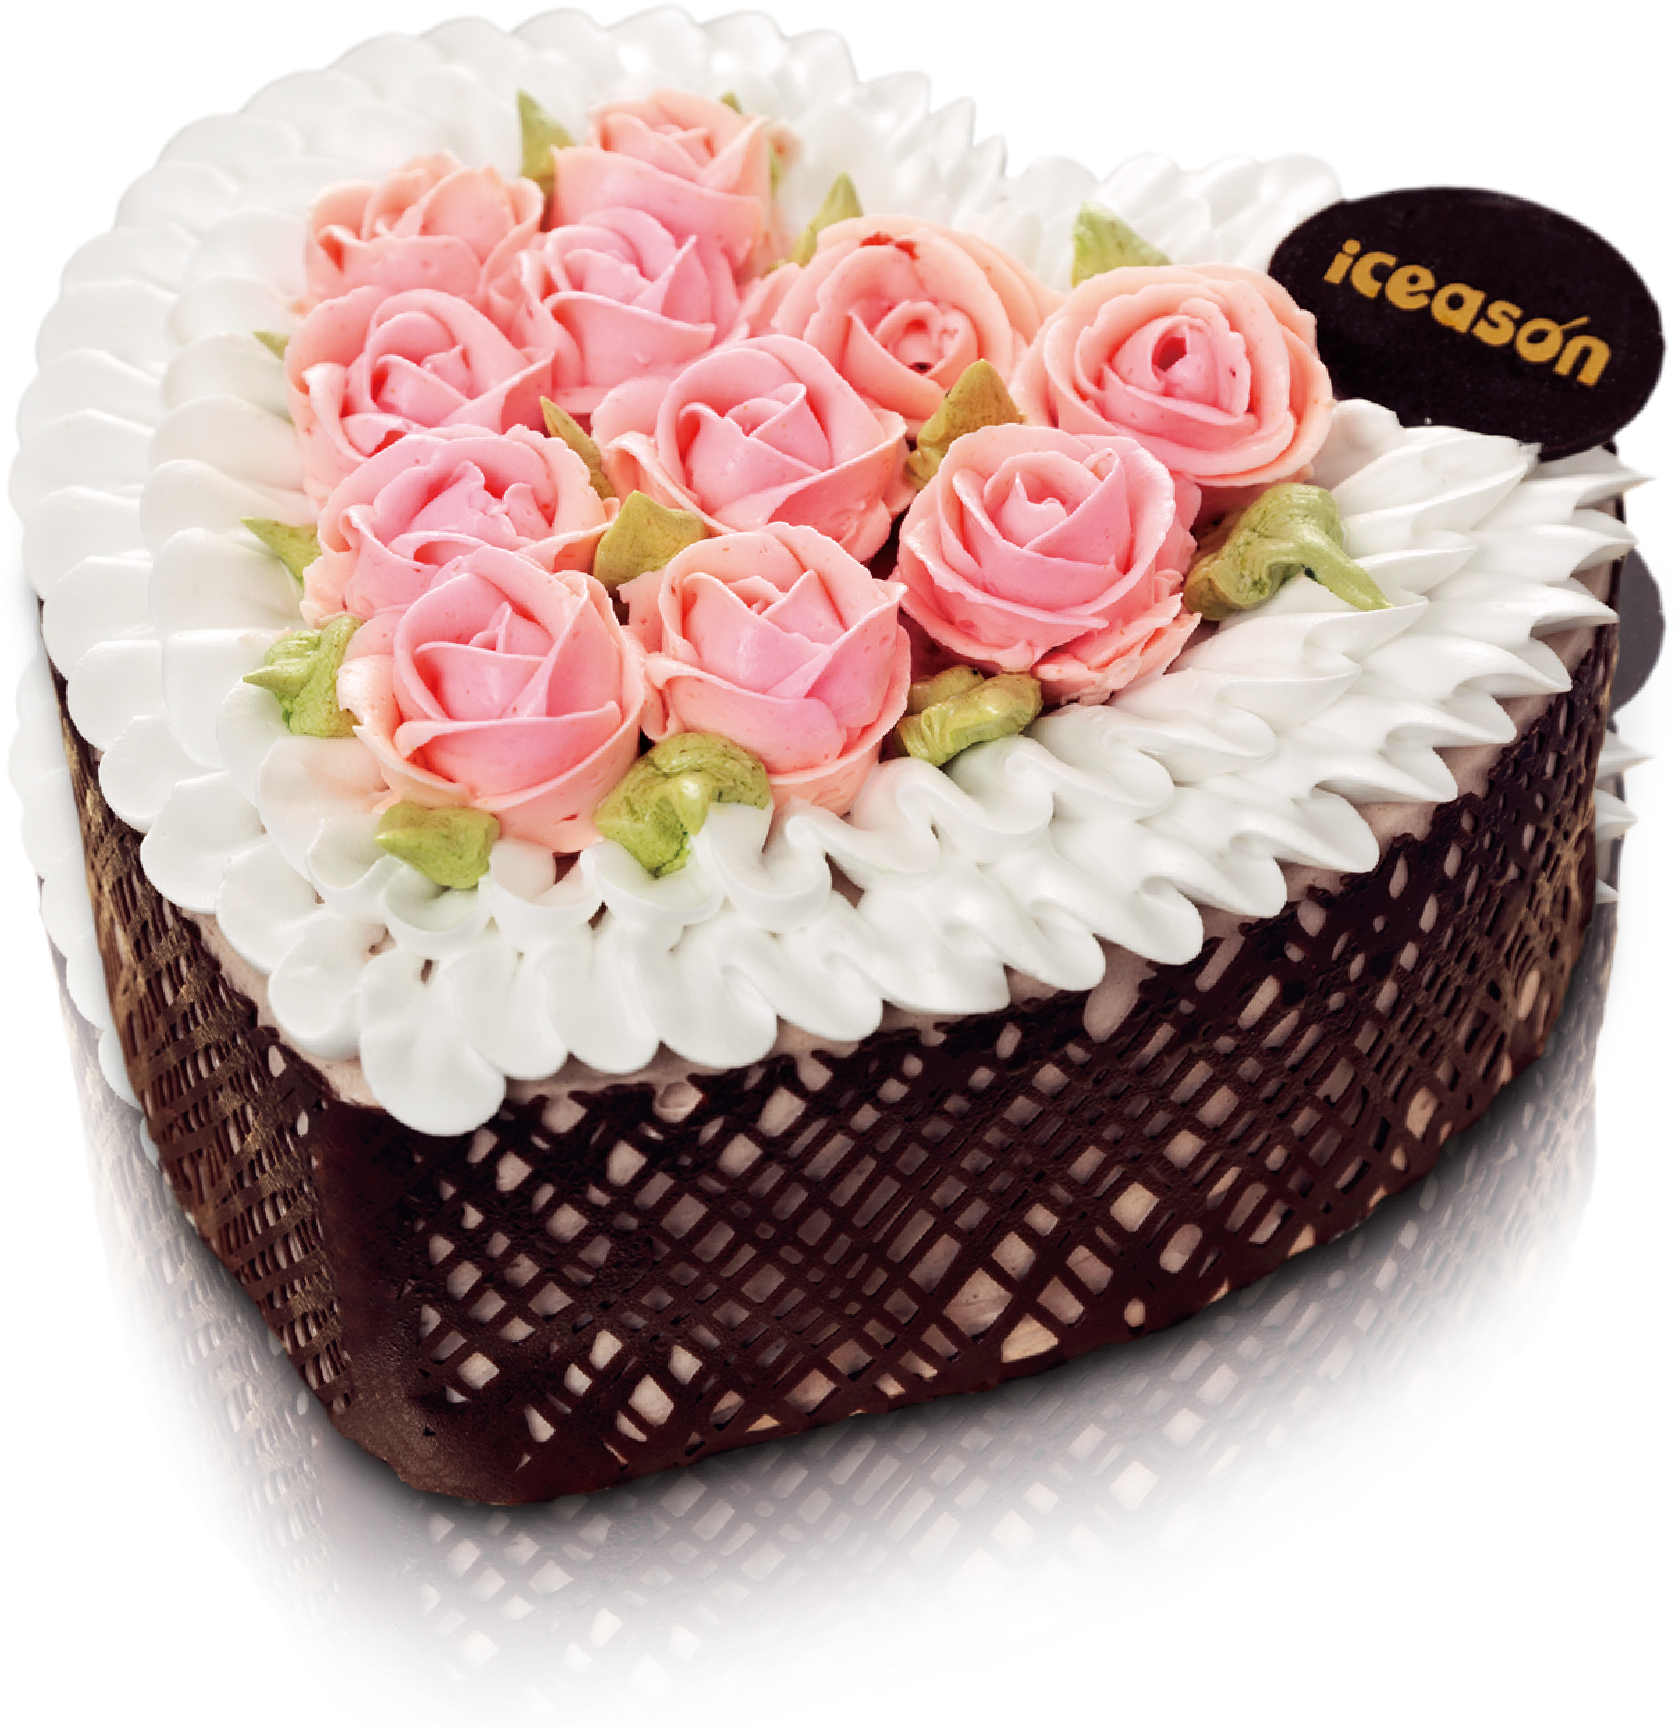 Ice Cream Icing Chocolate Cake Cupcake - Besica 10cm Heart Shaped Mousse Cake Mould, Removable (2330x2196)